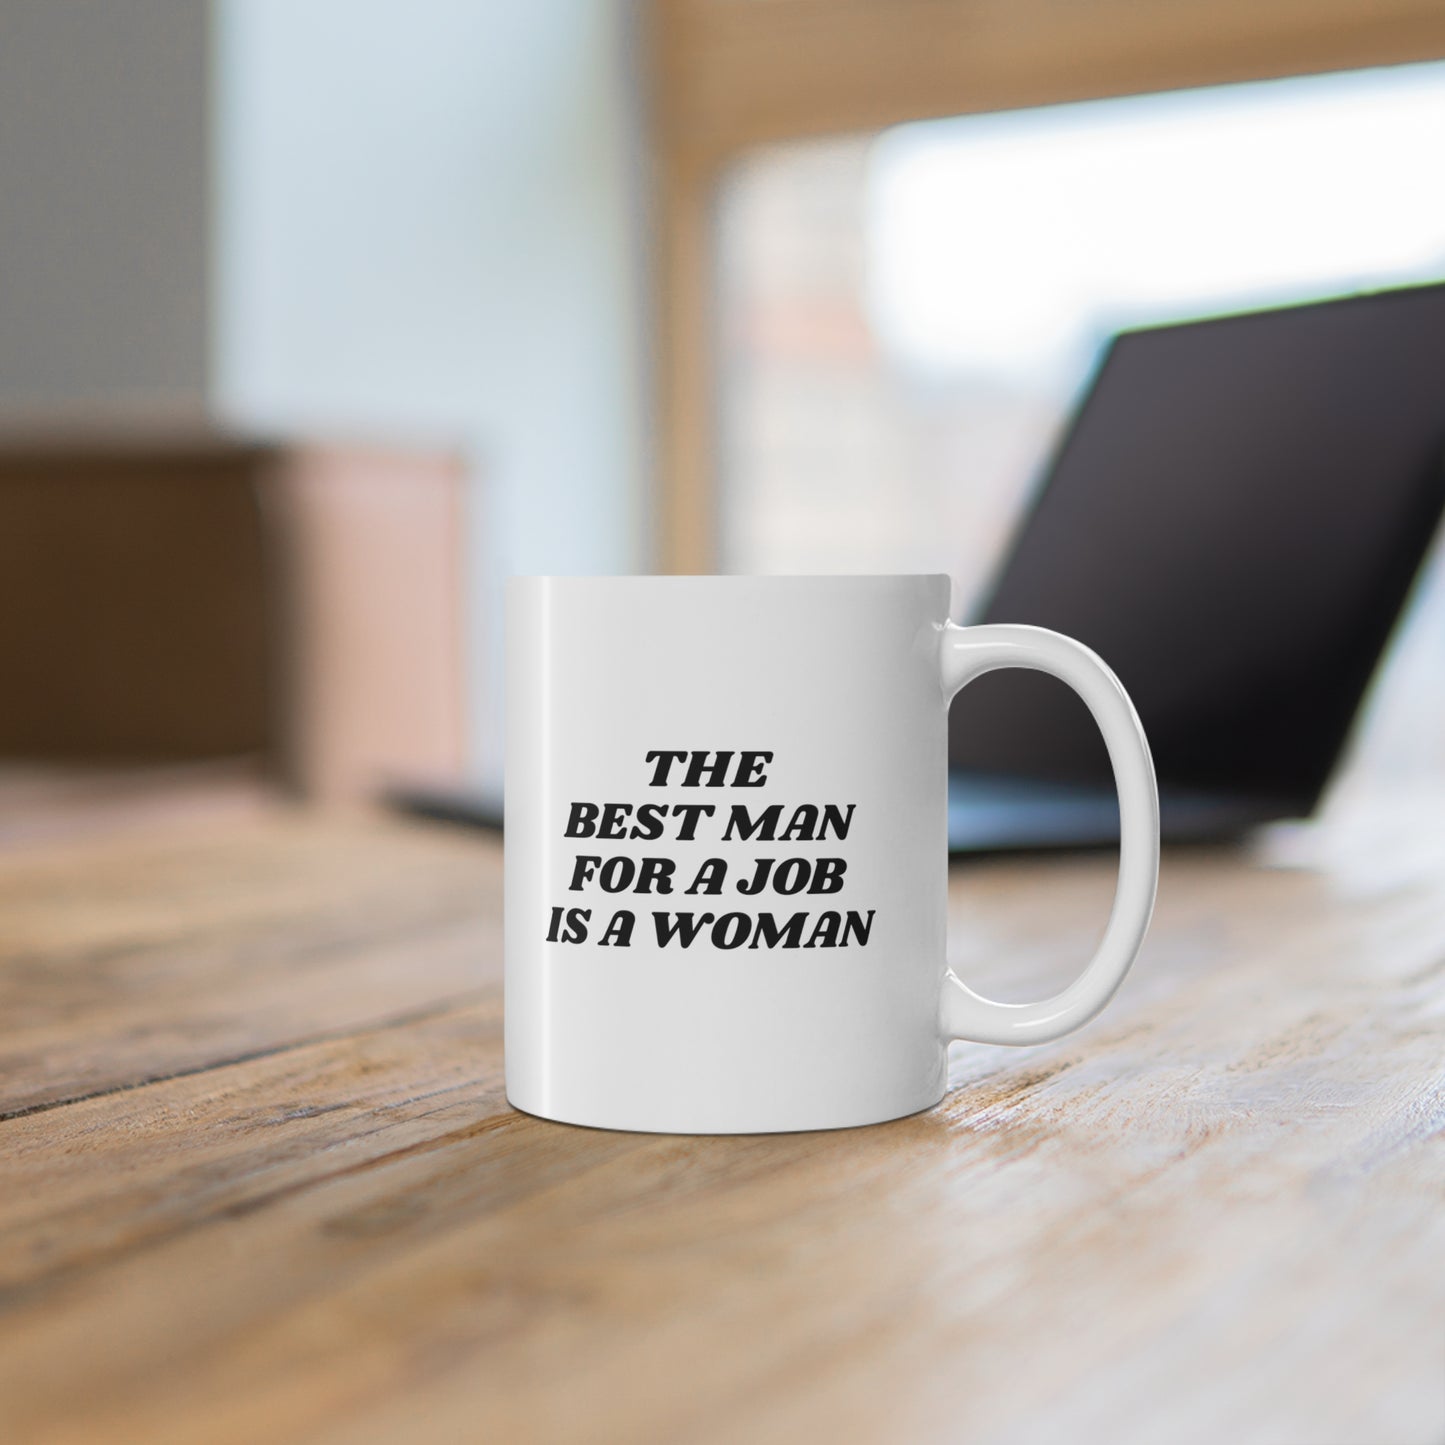 11oz ceramic mug with quote The Best Man For a Job is a Woman